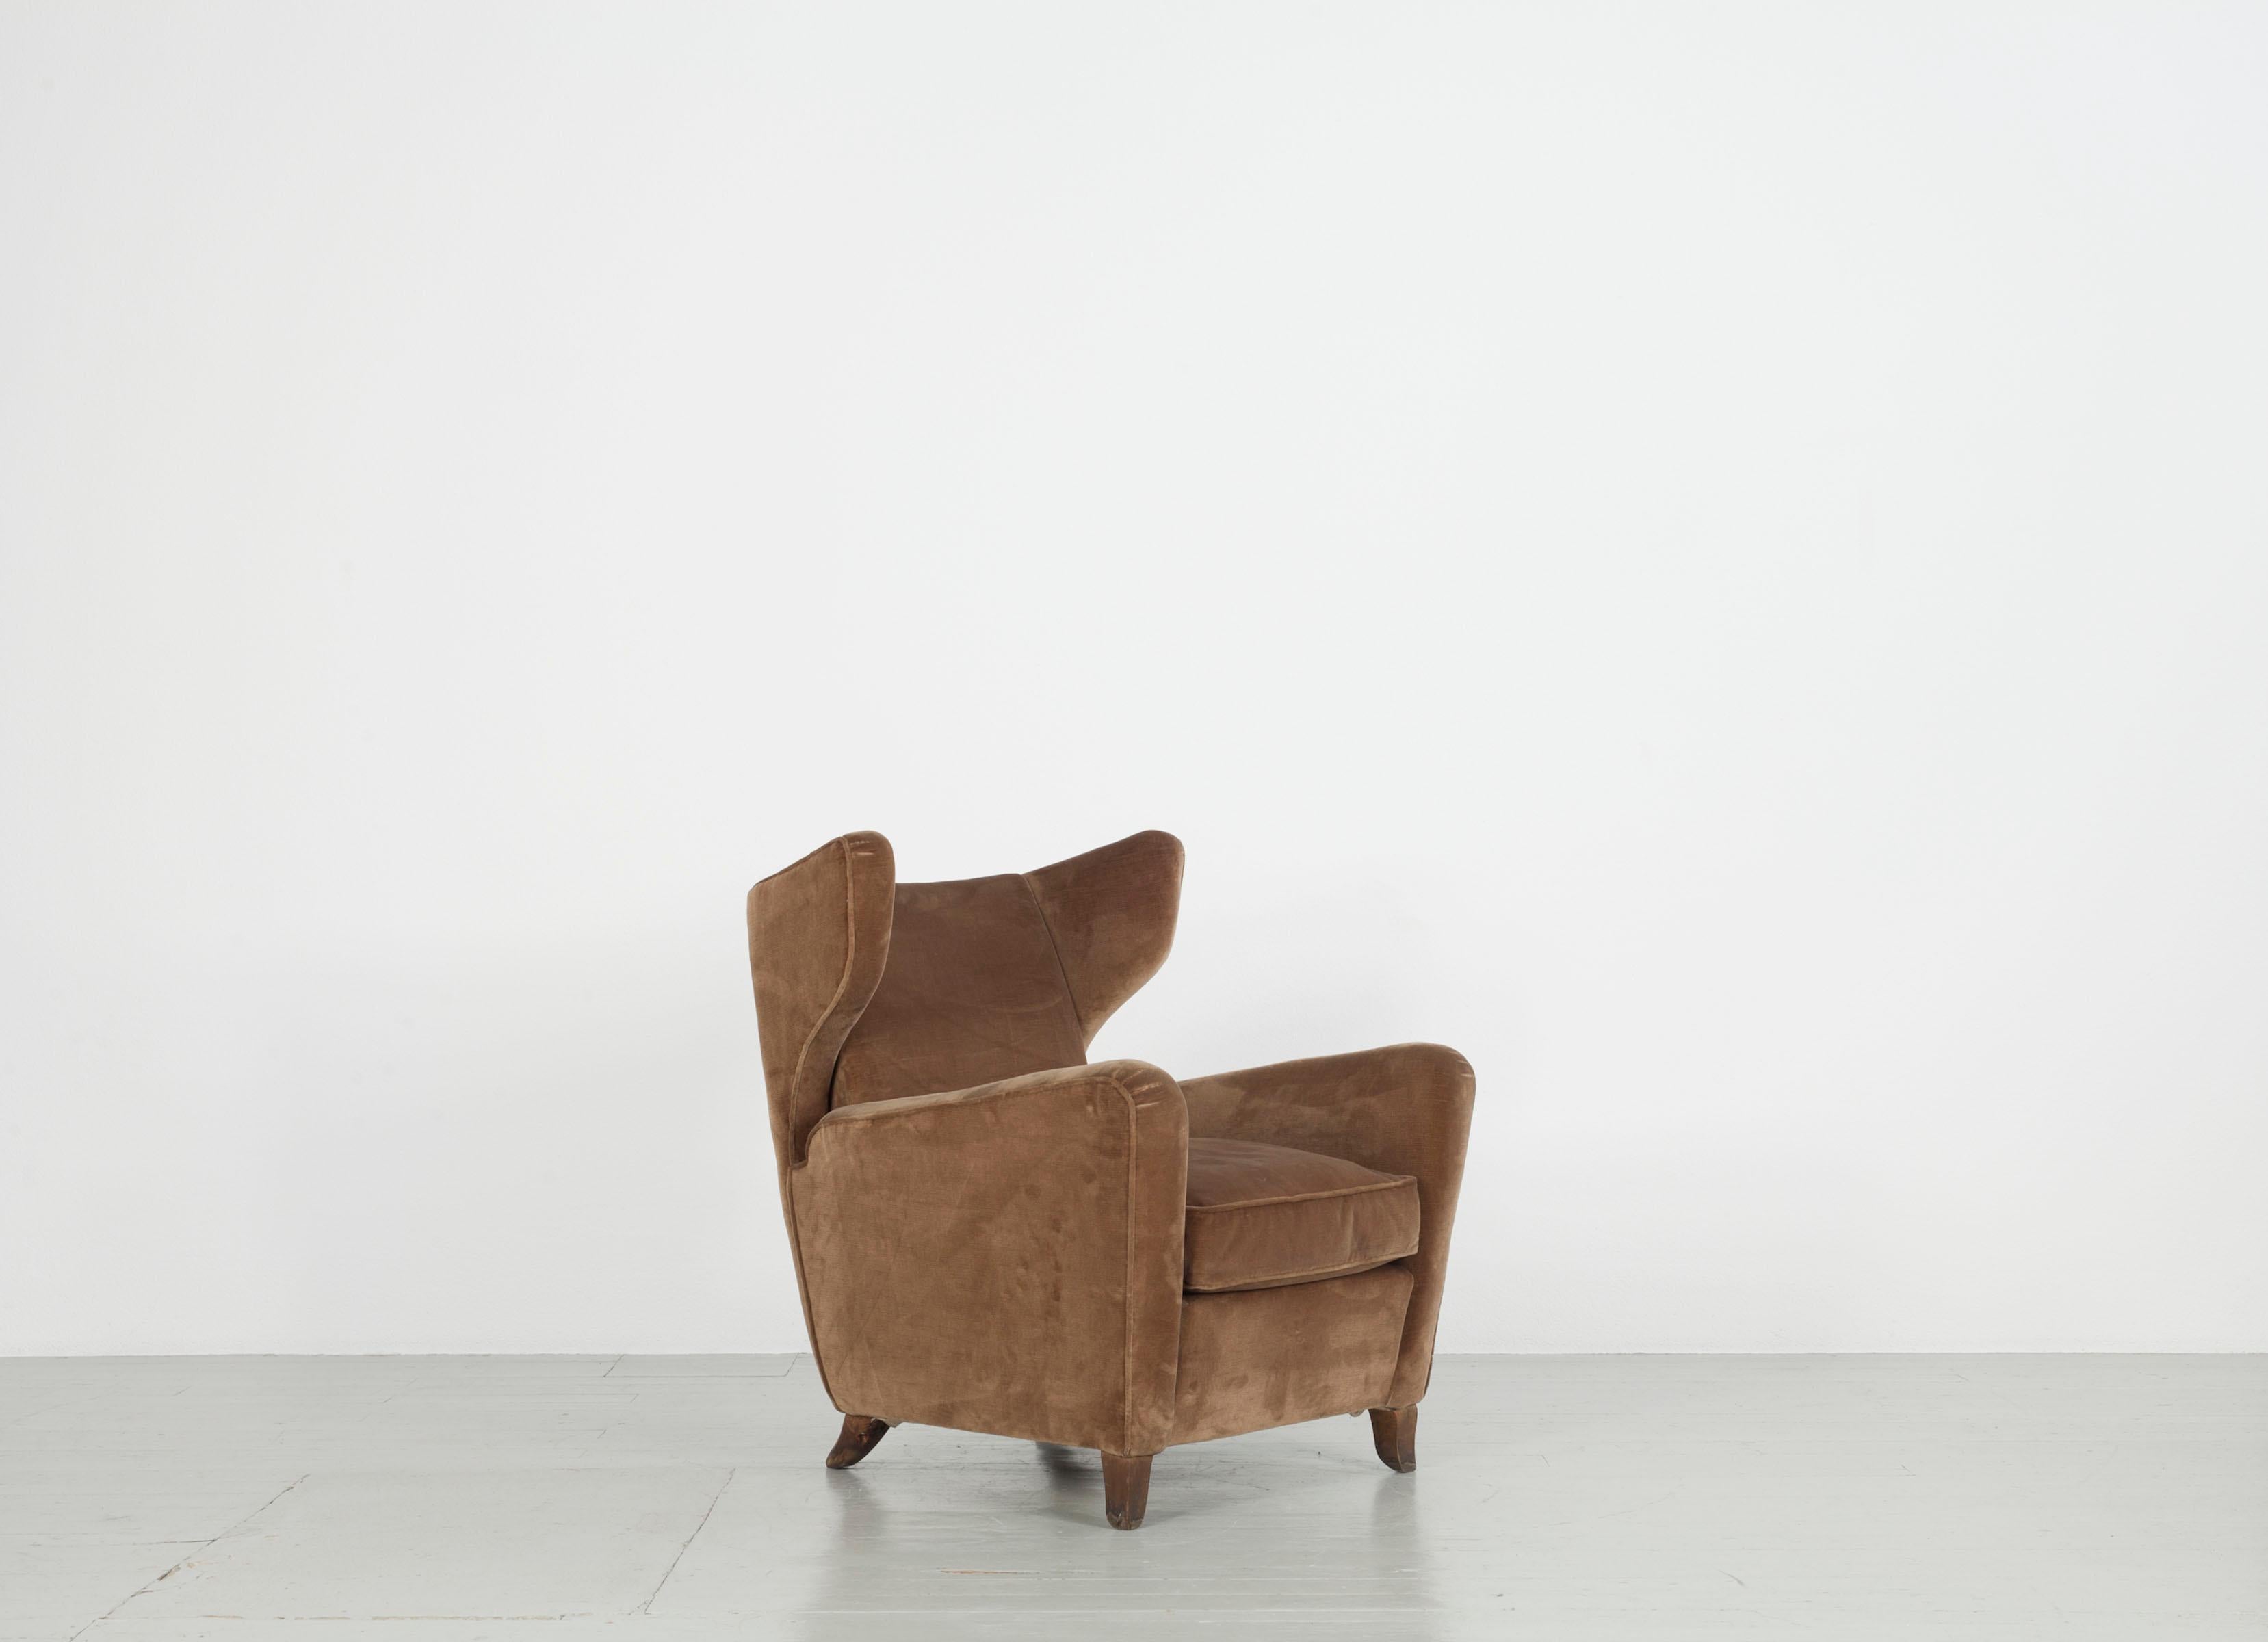 Set of Three Velvet Armchair, Melchiorre Bega Attributed, Italy, 1950s For Sale 2